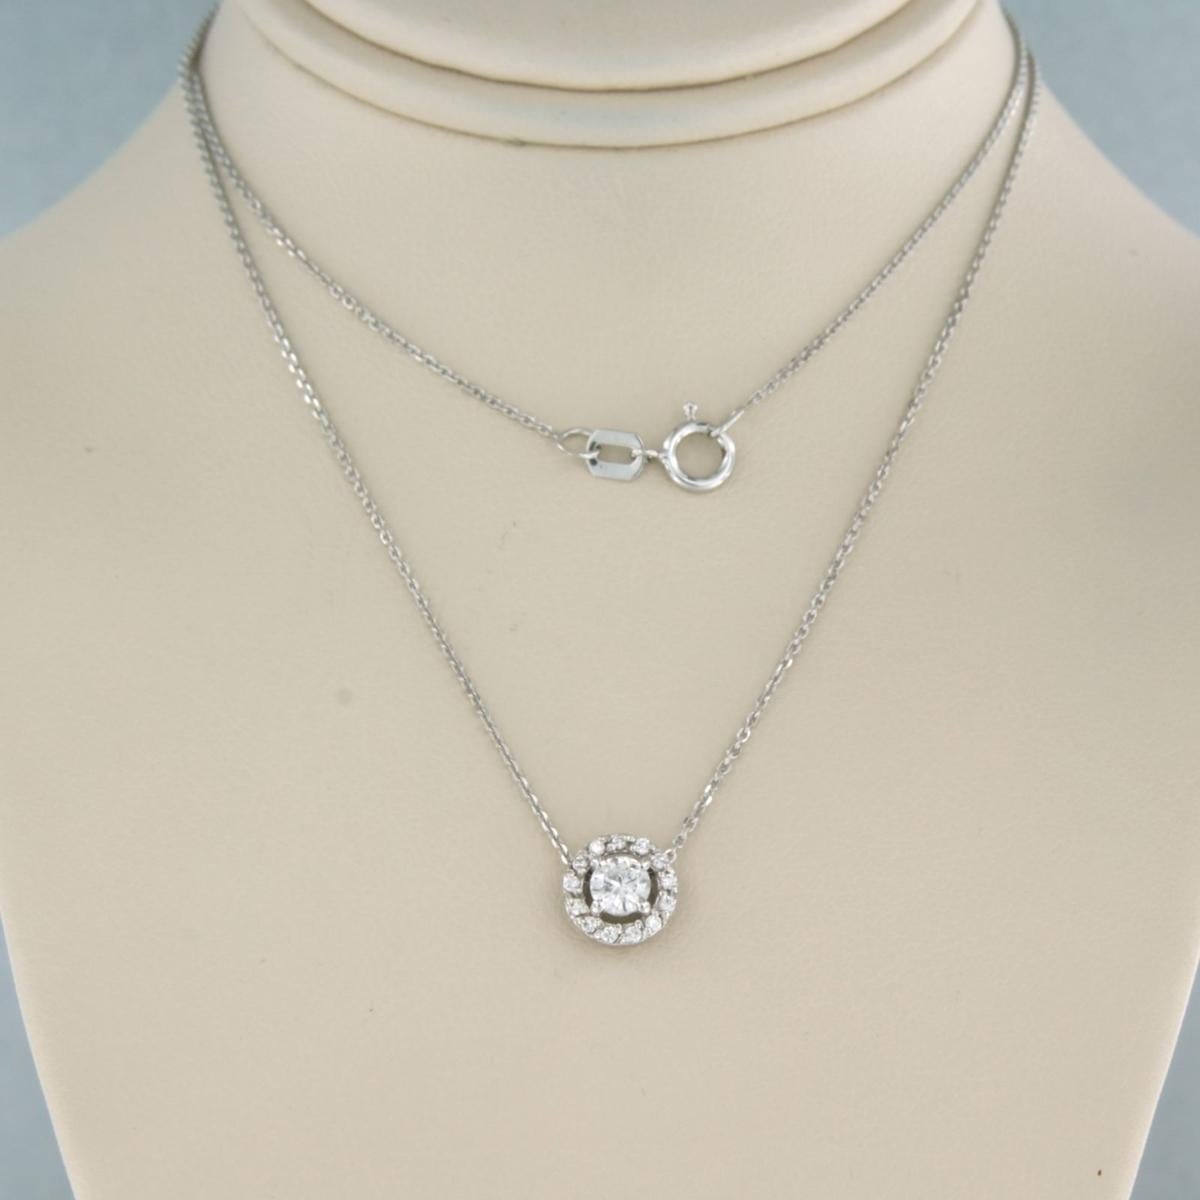 14k white gold necklace with cluster pendant set with brilliant cut diamonds totaling approximately 0.28 ct - F/G - VS/SI - 45 cm

detailed description

the length of the necklace is 45 cm long by 0.7 mm wide

the pendant is 7.4 mm wide

weight 1.8